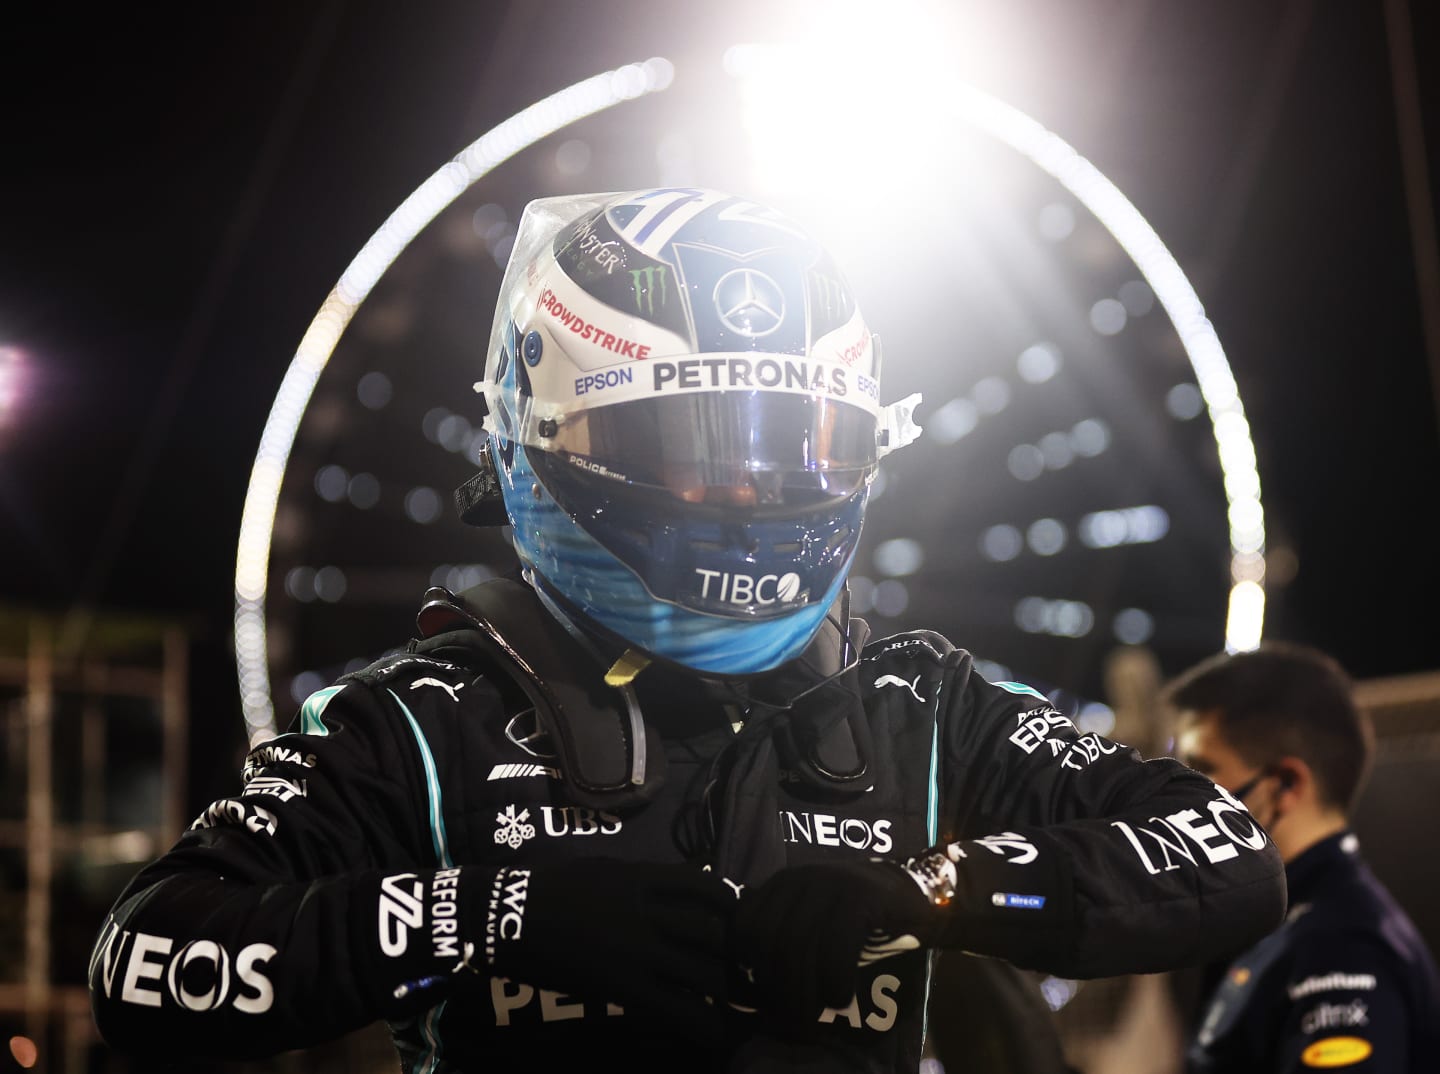 BAHRAIN, BAHRAIN - MARCH 27: Third placed qualifier Valtteri Bottas of Finland and Mercedes GP looks on in parc ferme during qualifying ahead of the F1 Grand Prix of Bahrain at Bahrain International Circuit on March 27, 2021 in Bahrain, Bahrain. (Photo by Lars Baron/Getty Images)